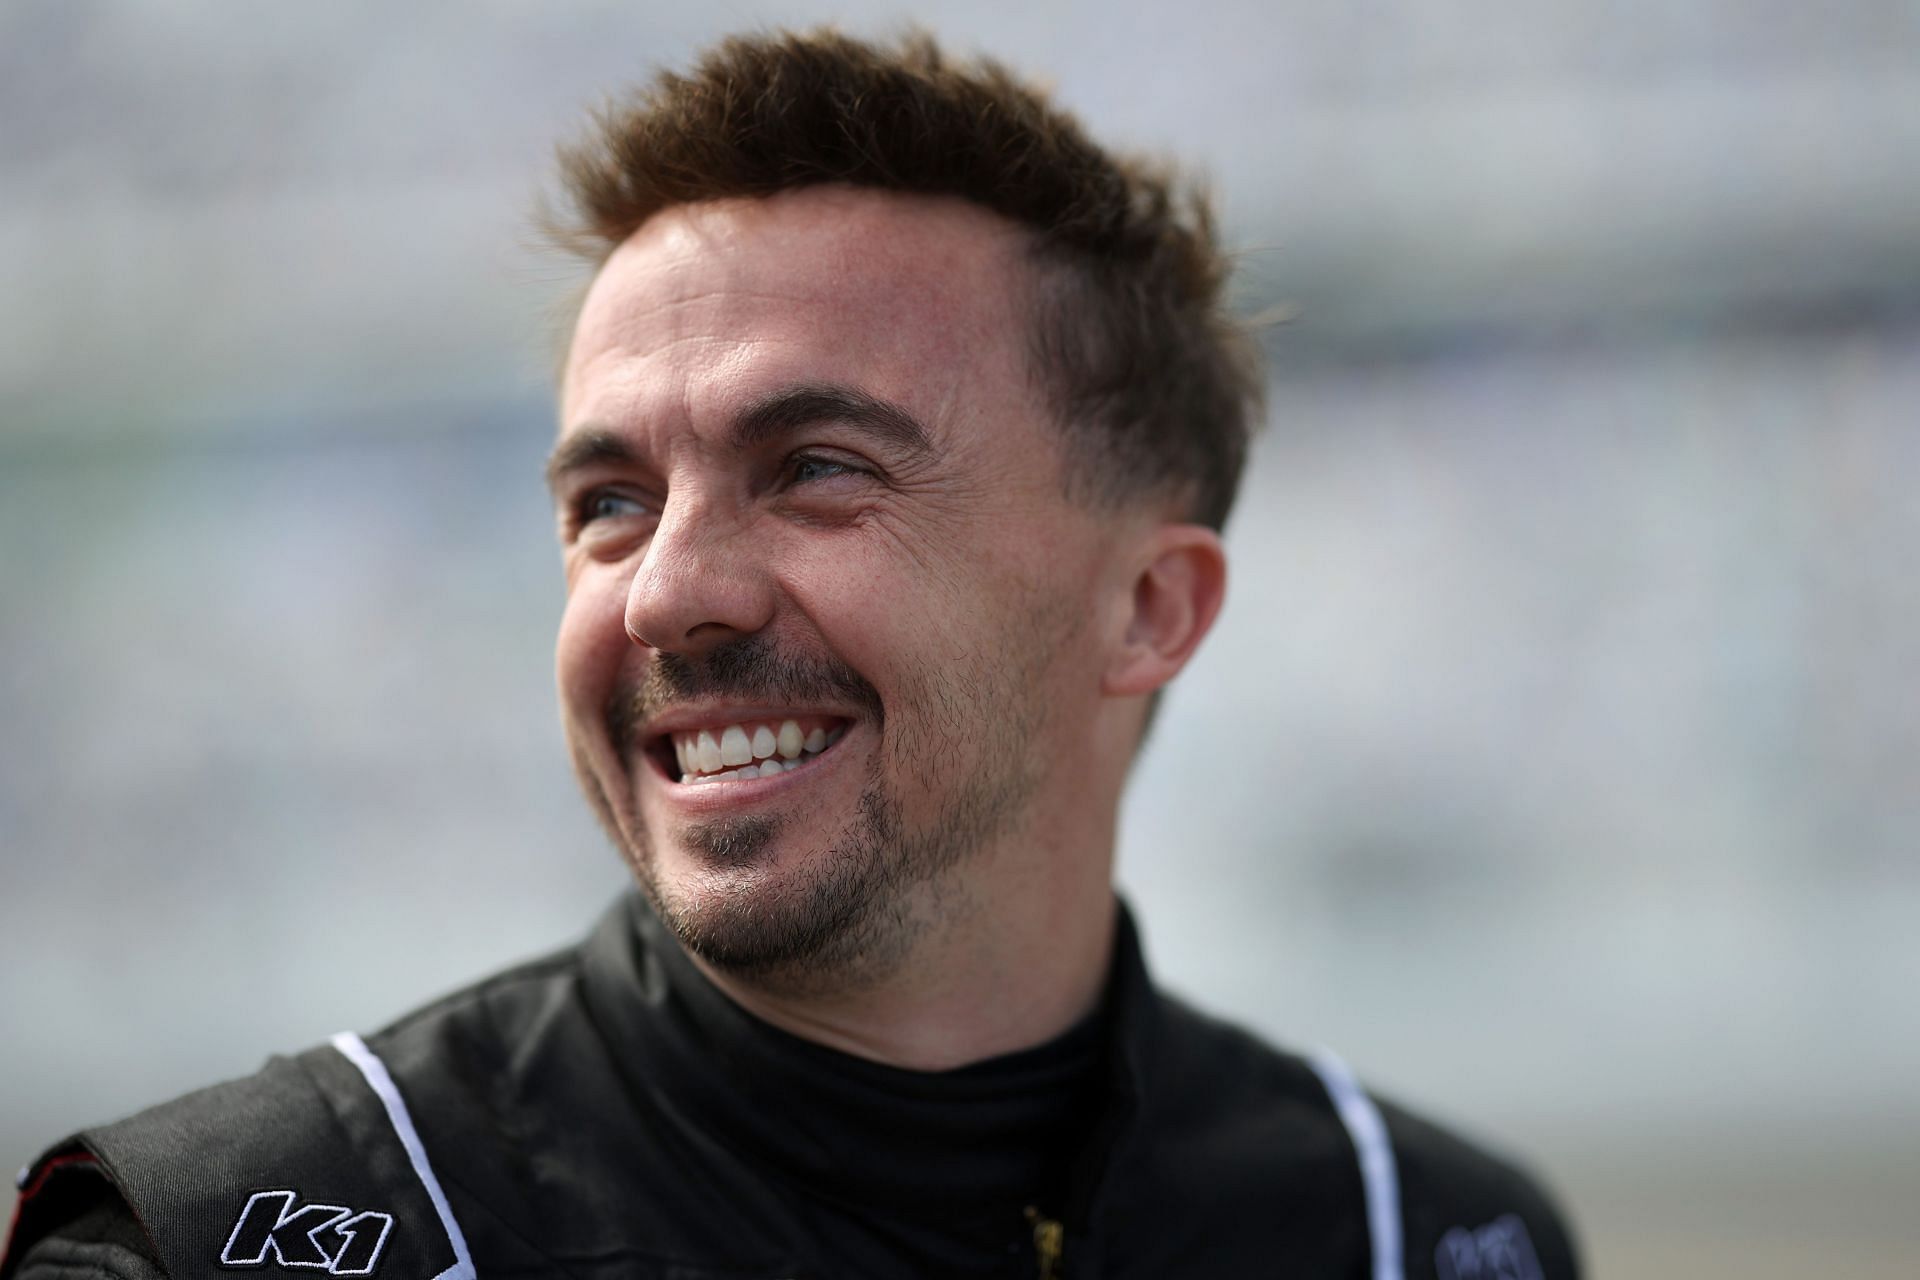 Frankie Muniz names the NASCAR Cup Series drivers who’ve helped him